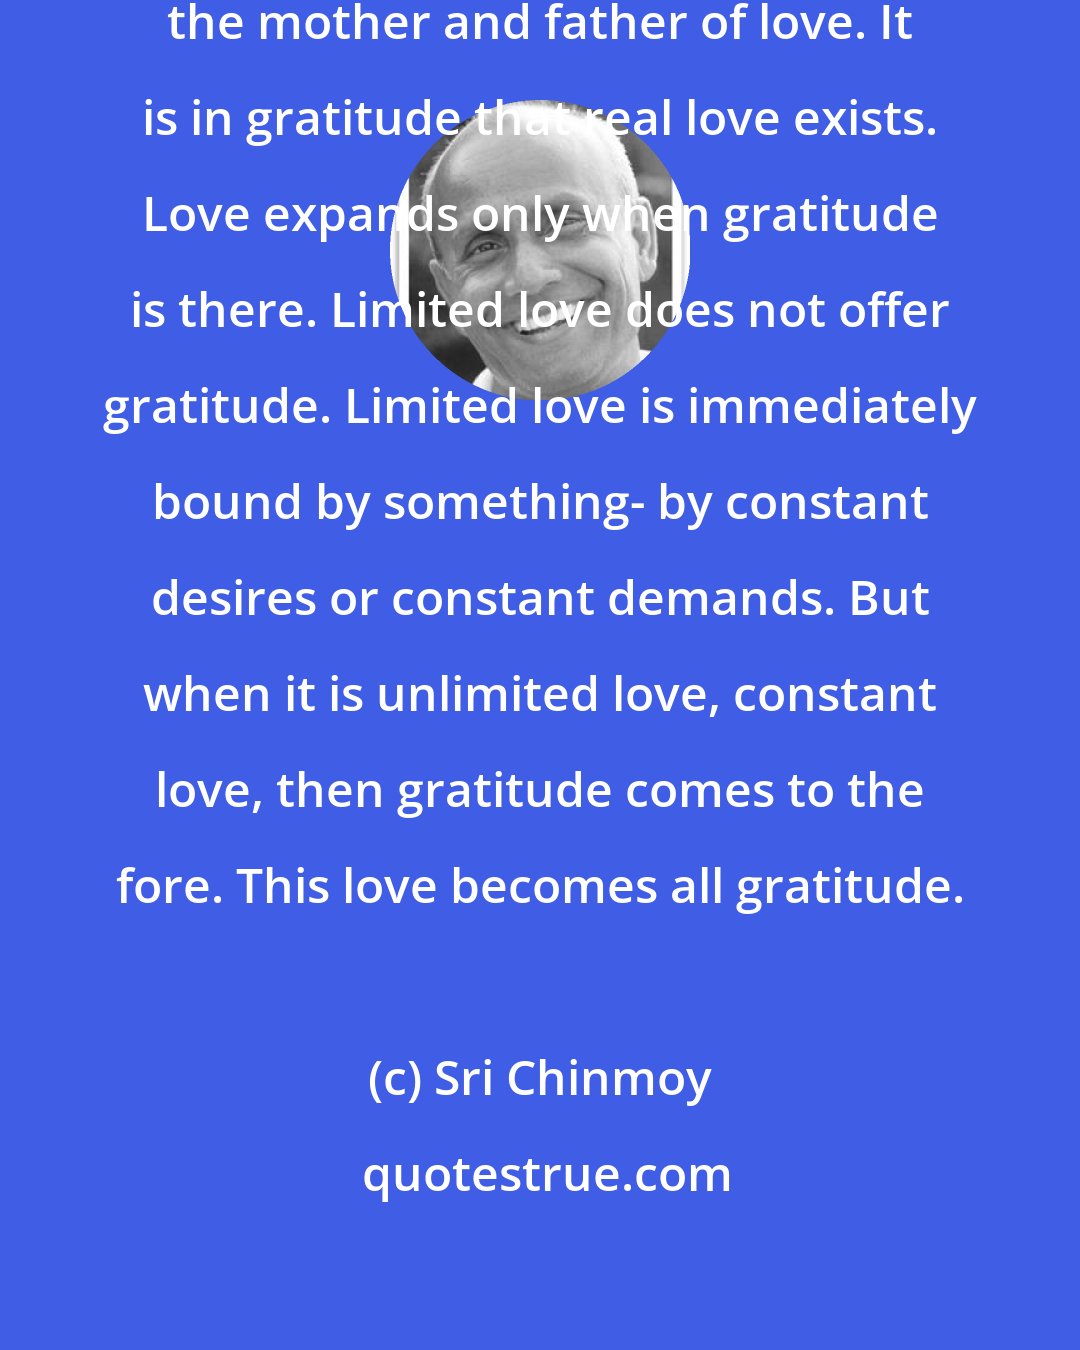 Sri Chinmoy: Gratitude is the creative force, the mother and father of love. It is in gratitude that real love exists. Love expands only when gratitude is there. Limited love does not offer gratitude. Limited love is immediately bound by something- by constant desires or constant demands. But when it is unlimited love, constant love, then gratitude comes to the fore. This love becomes all gratitude.